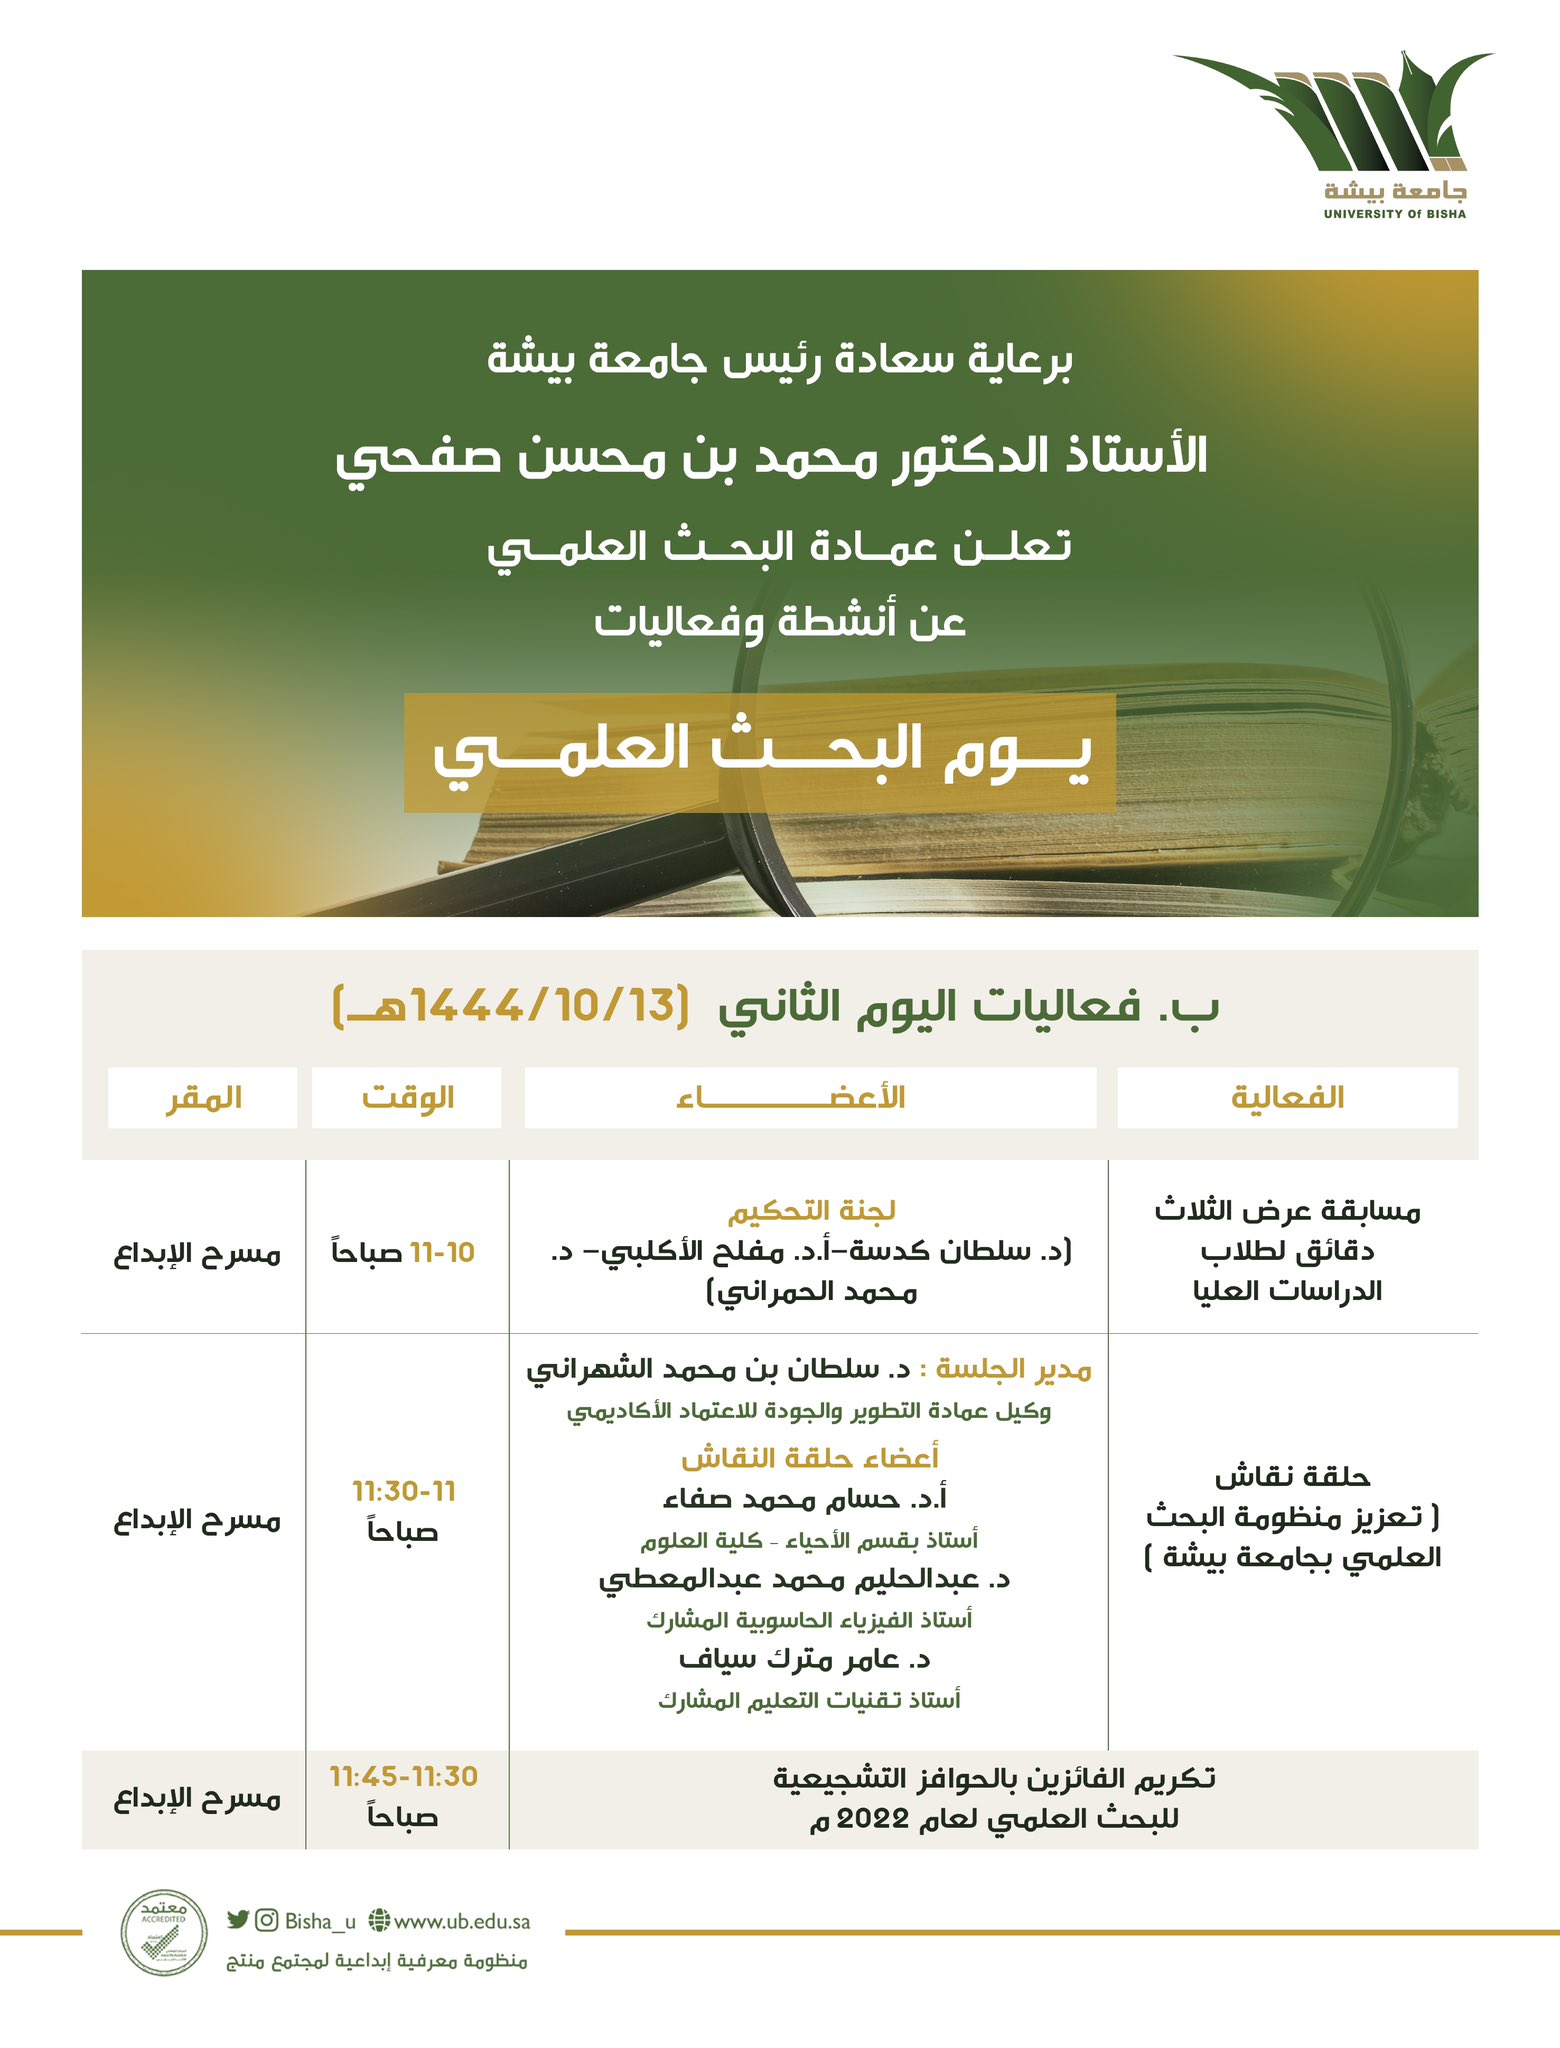 The Deanship of Scientific Research invites you to attend Scientific Research Day - The activities of the second day (Wednesday - 10/13/1444 AH) to announce the winners of the Encouragement Awards for researchers